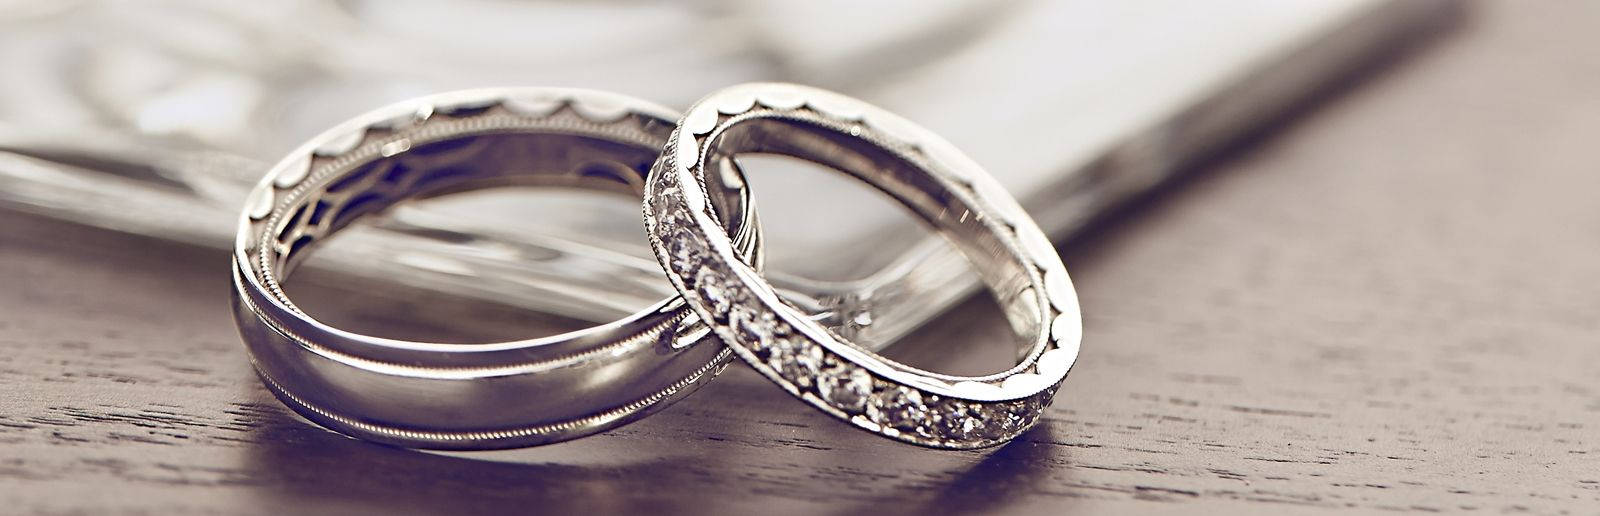 Silver With Diamond Wedding Rings Wallpaper